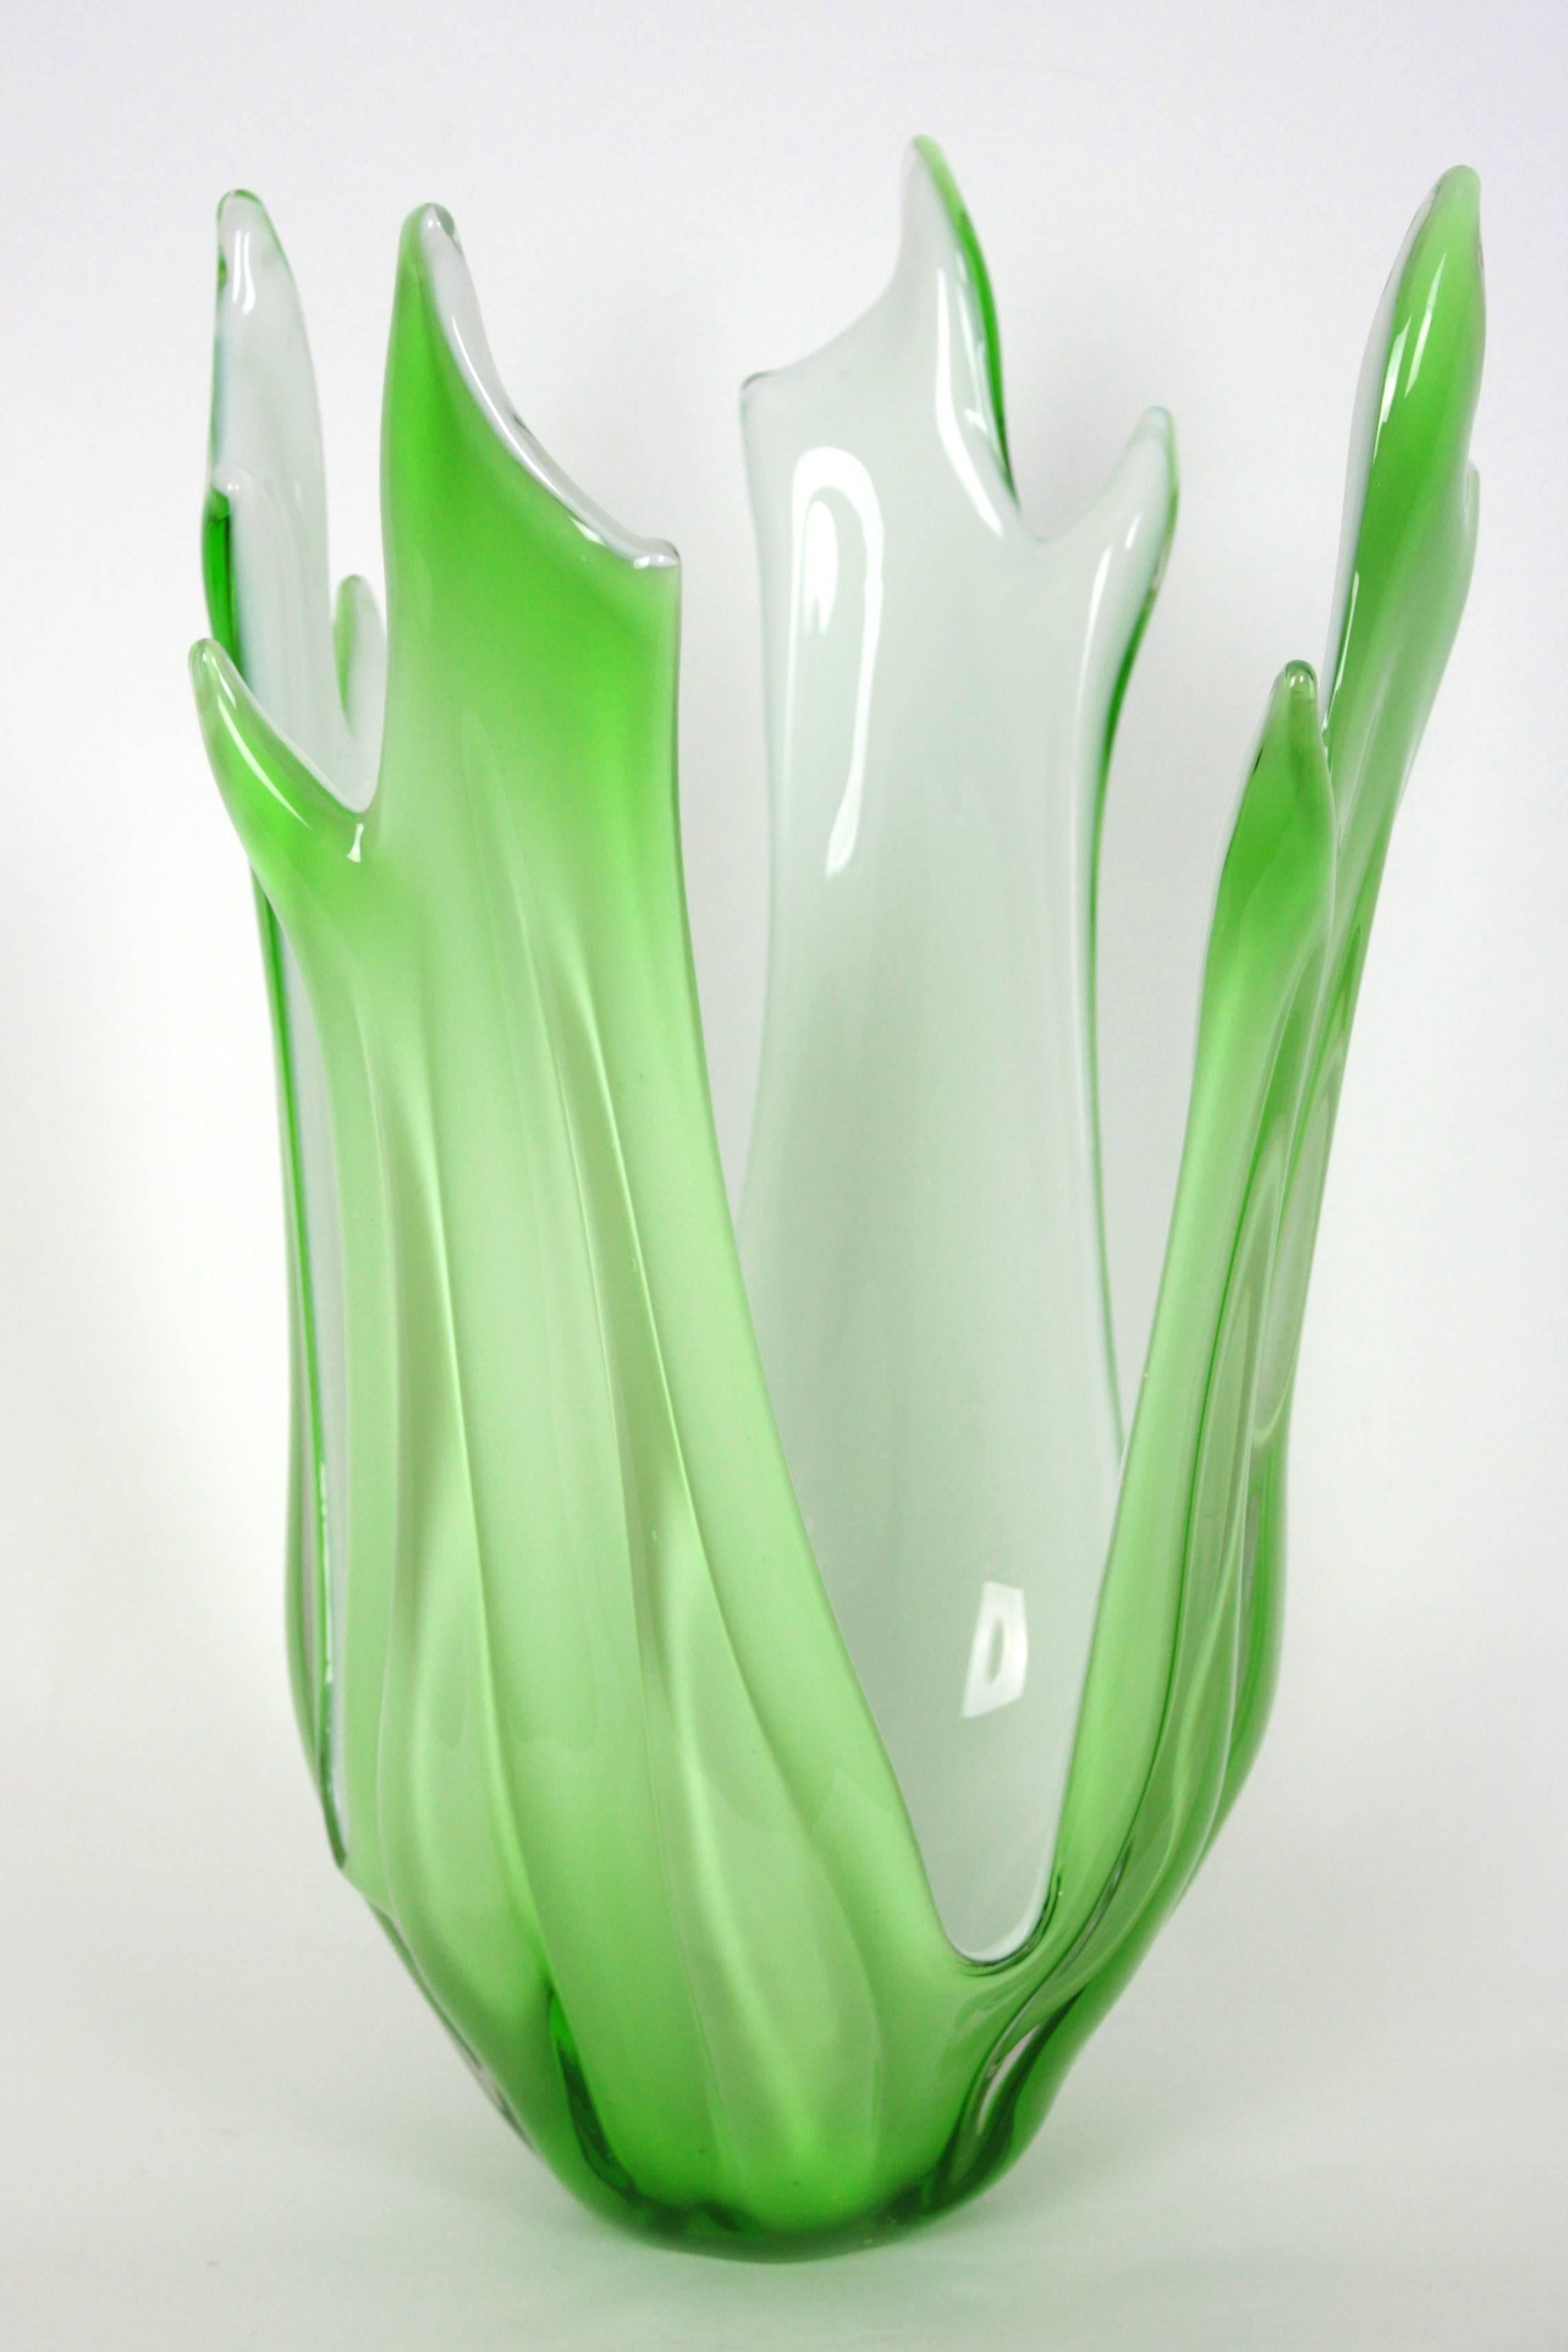 Sculptural and highly decorative large Murano glass vase in mint green color. The interior part is made in white opaline glass.
Excellent condition.
Italy, 1960s.

Avaliable other Murano glass pieces:
Please, kindly check our storefront.